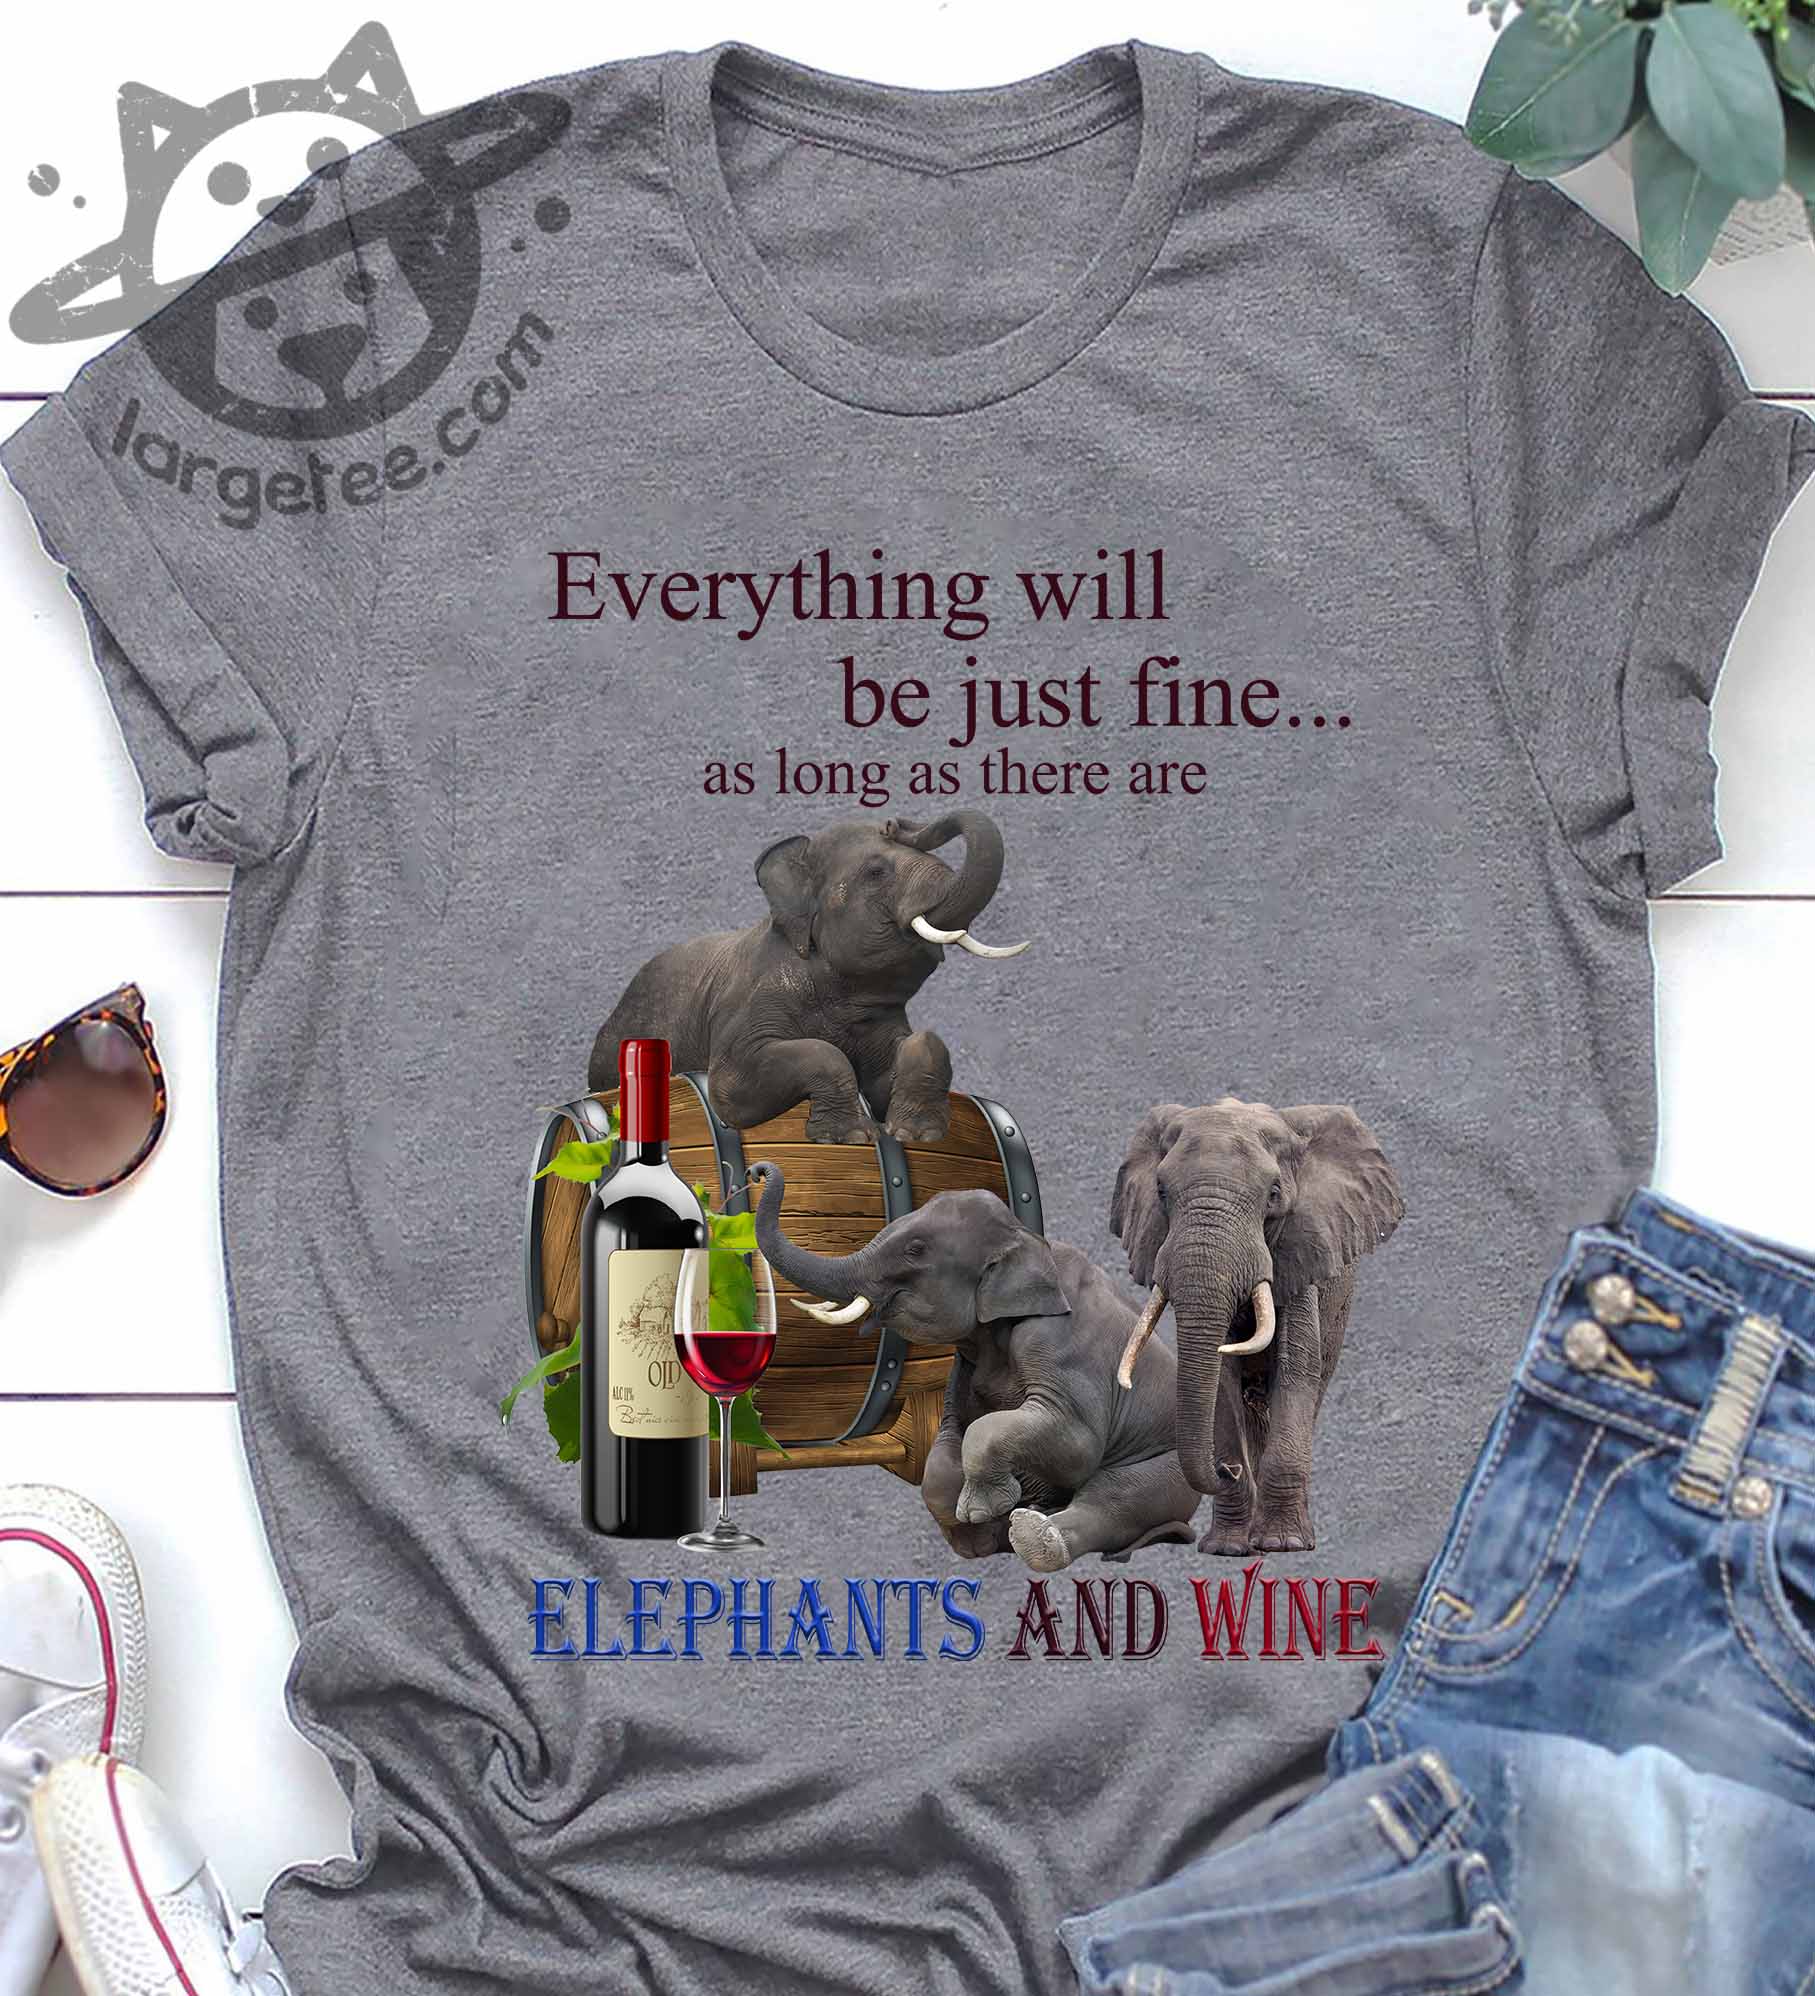 Everything will be just fine as long as there are elephants and wine